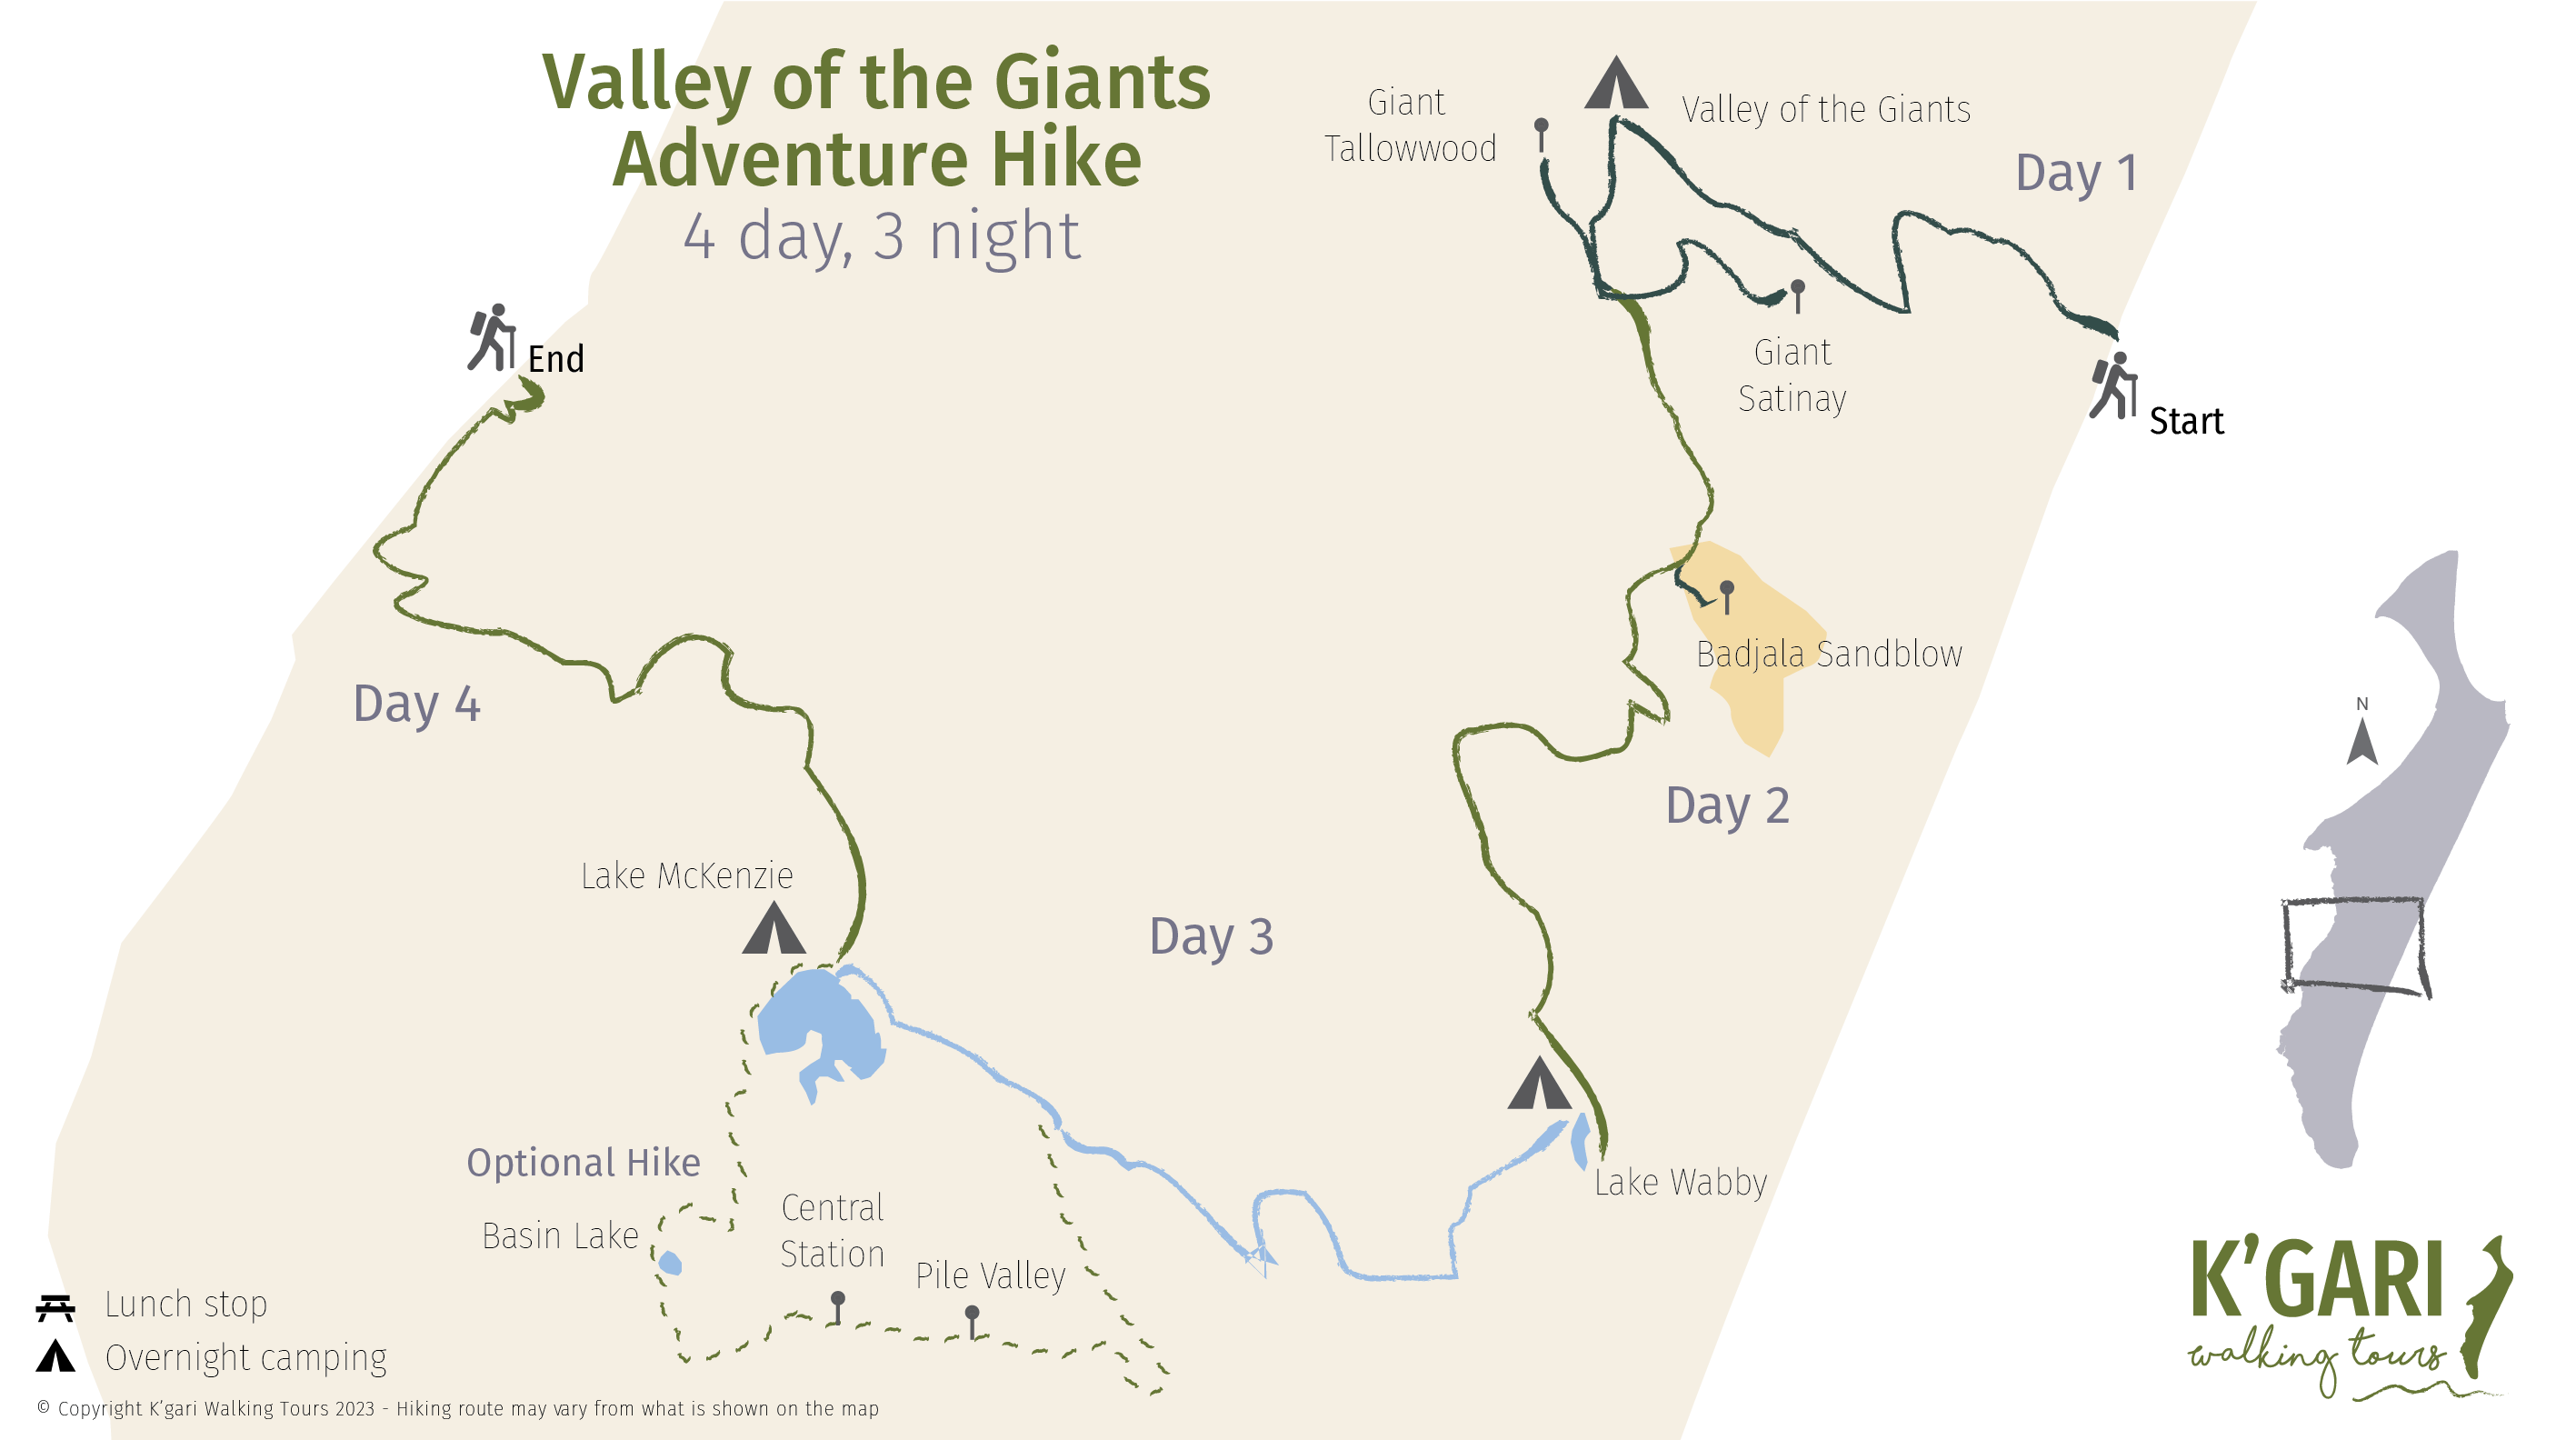 Valley of the Giants itinerary map